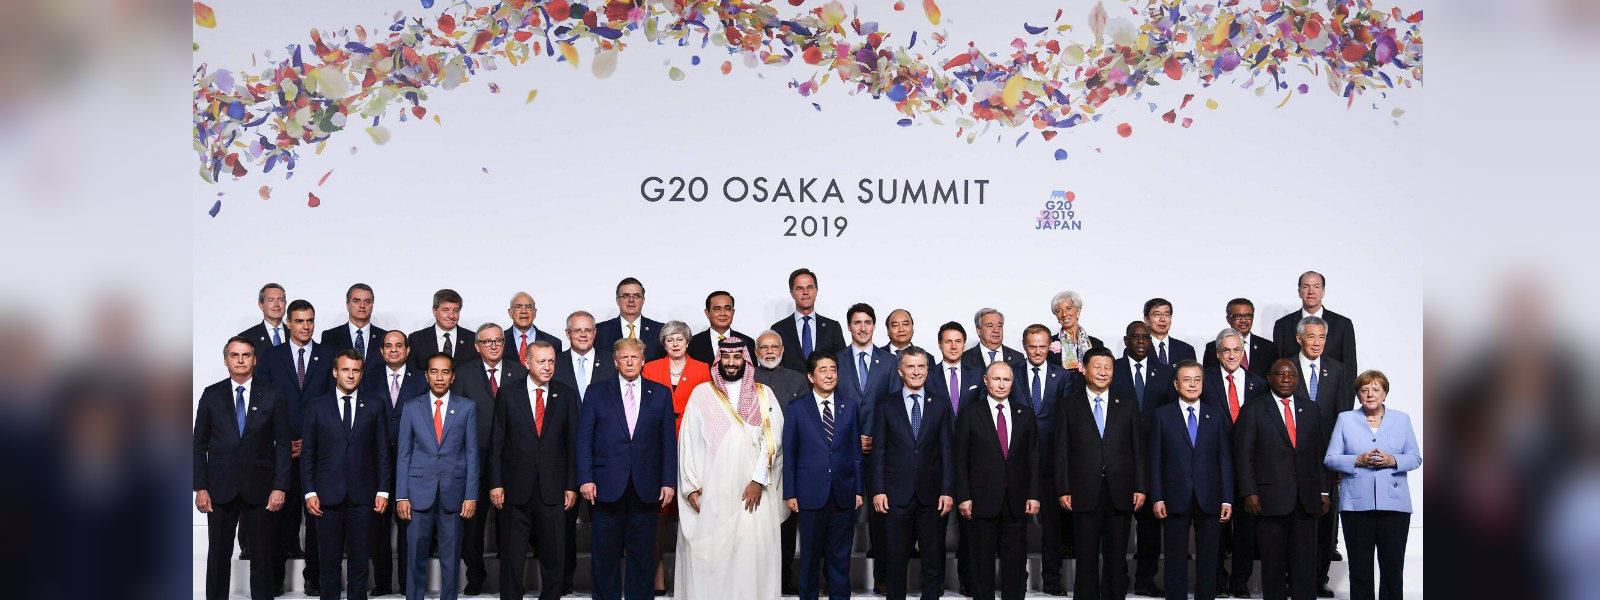 G20 summit concludes in Osaka, Japan